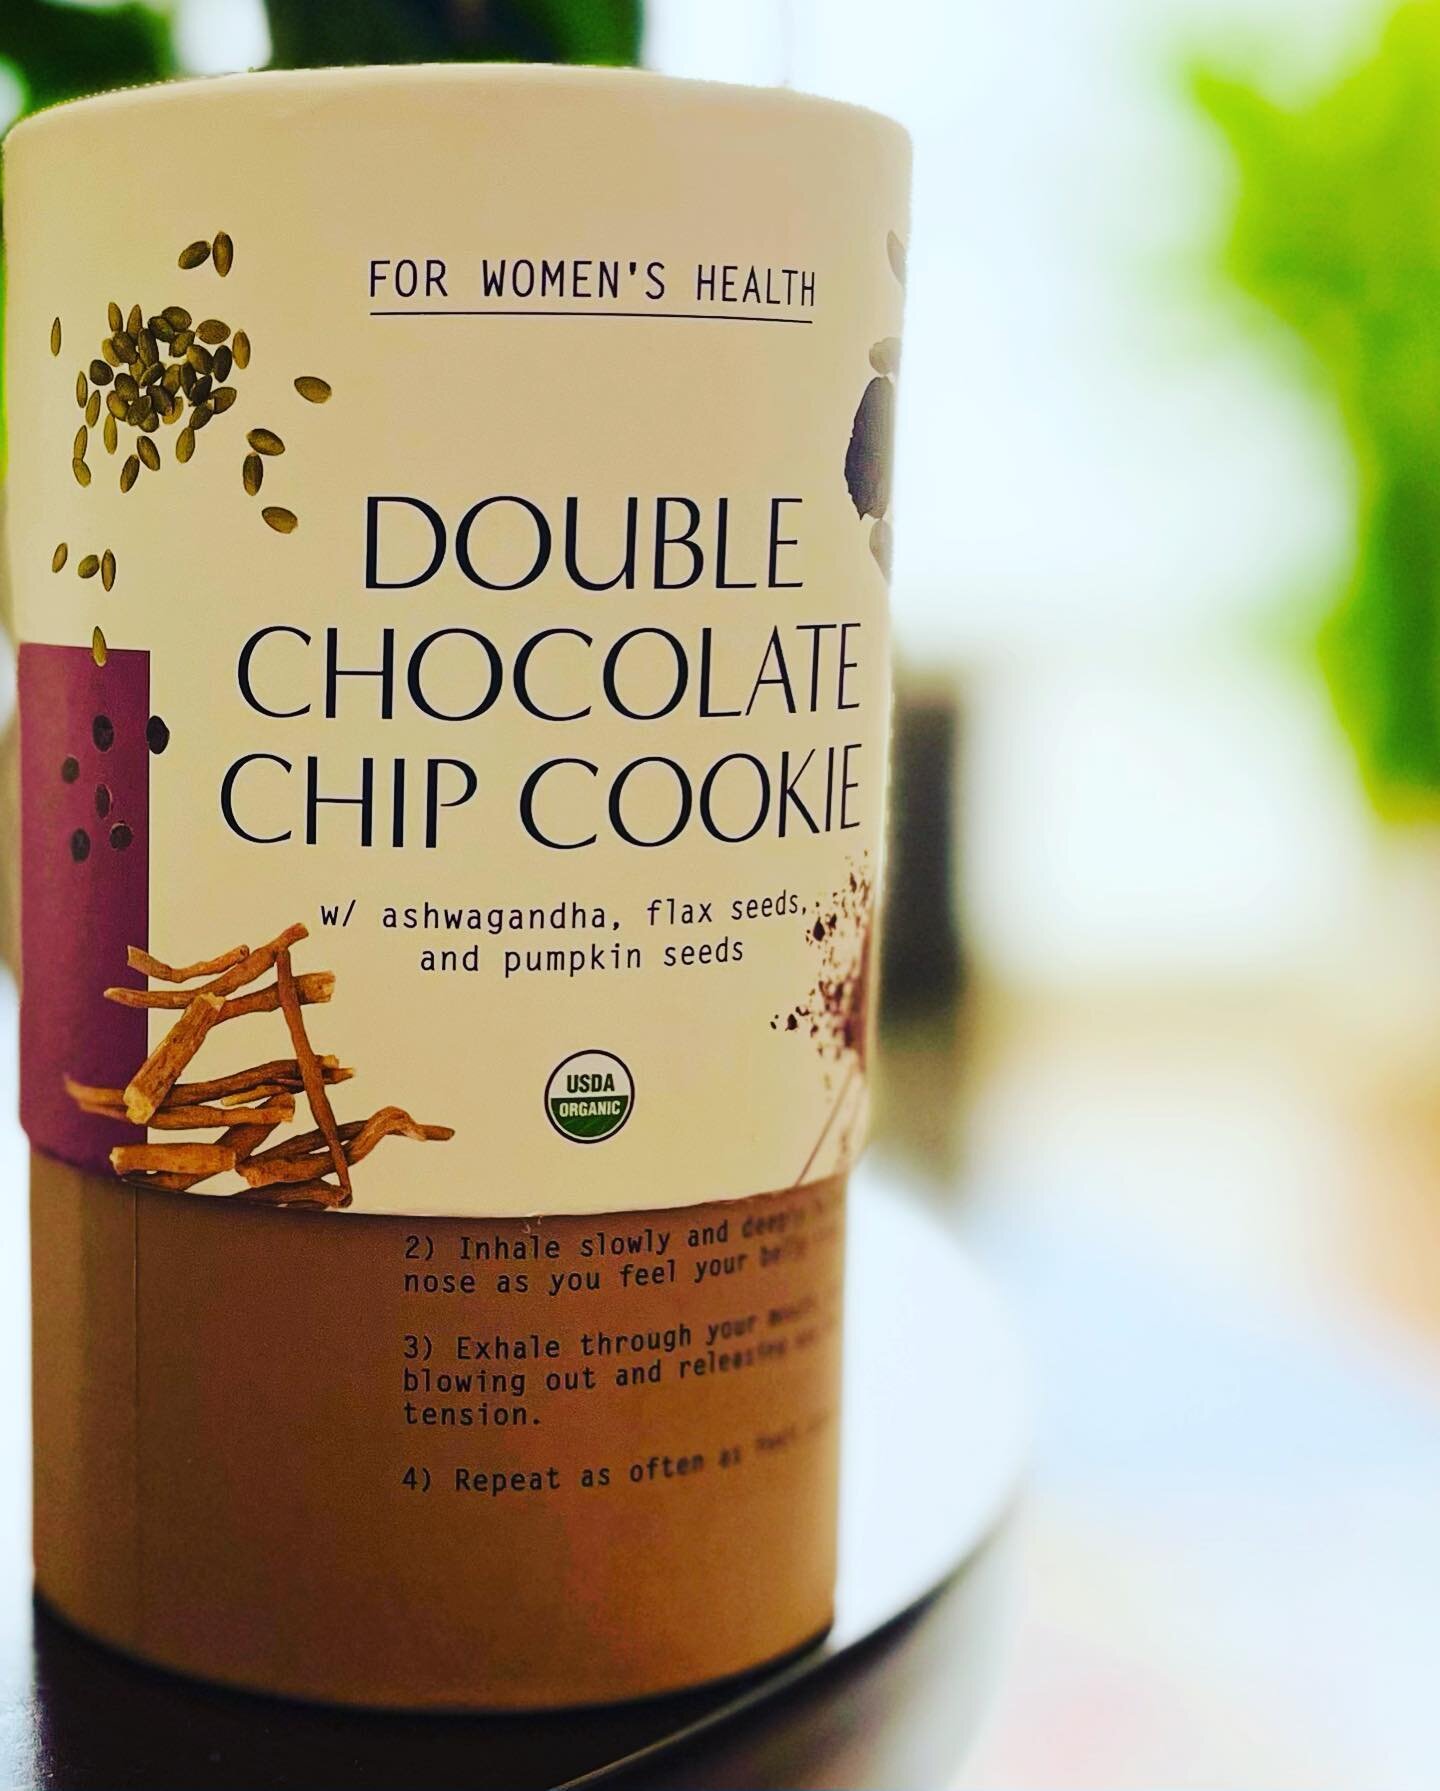 Listen, I was so excited opening my @agniforall double chocolate chip cookies. Could taste them before I even unpacked them 😋. Then I removed the top and was unexpectedly met with An Invitation to breathe - printed right on the container 🧘🏾&zwj;♂️